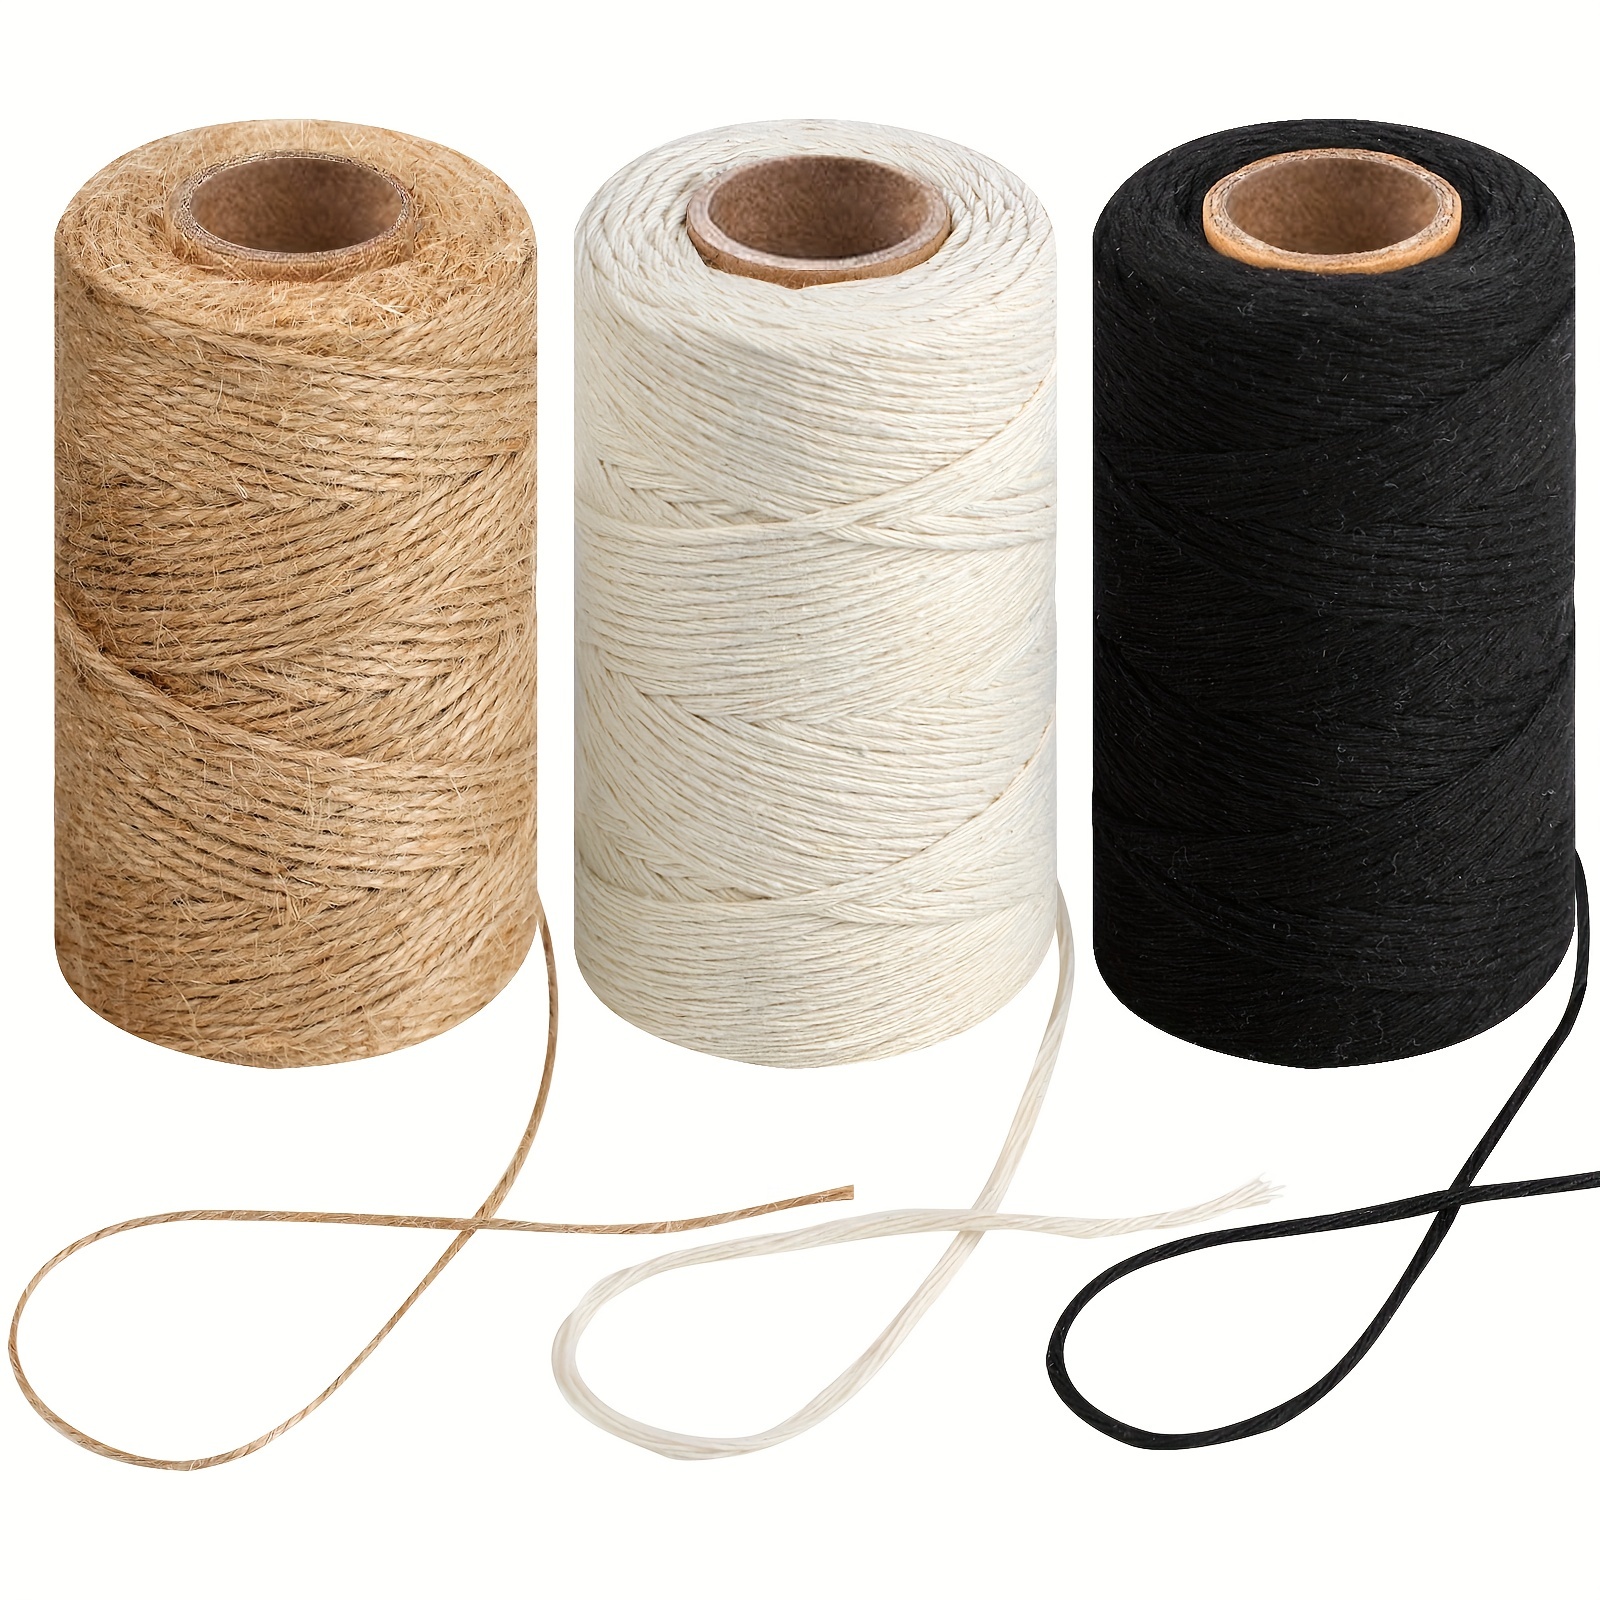 984 Ft Twine String, Natural Jute Twine, 2mm Thin White Cotton Twine Rope,  10ply Black Cotton Twine For Crafts, Art, Gardening Plants, Gift Wrapping